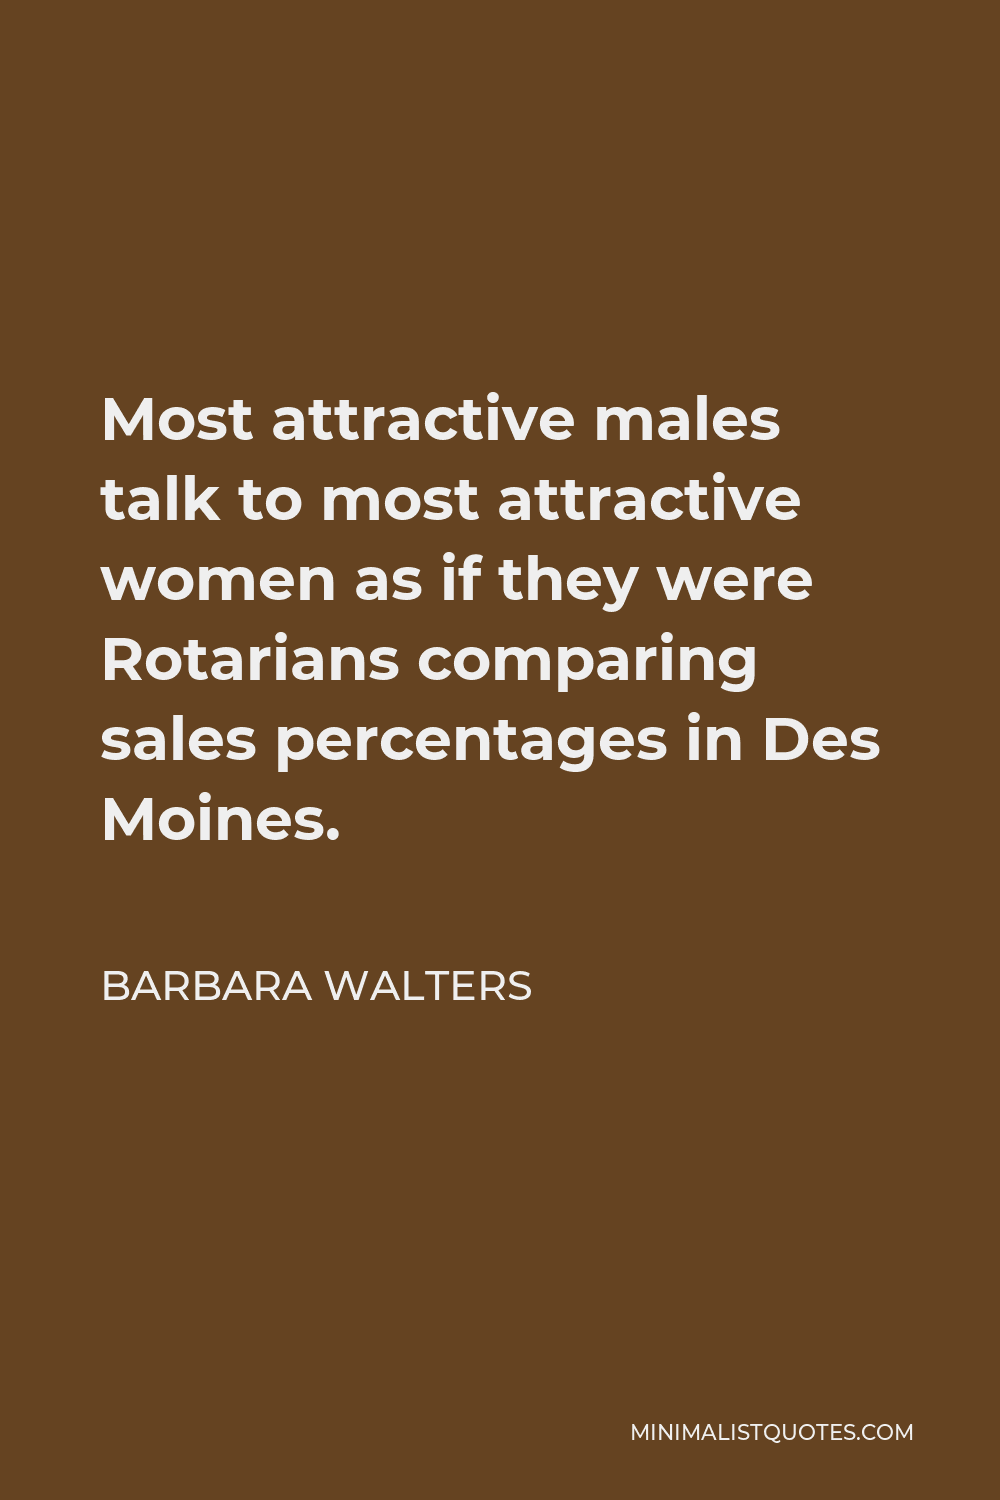 Barbara Walters Quote - Most attractive males talk to most attractive women as if they were Rotarians comparing sales percentages in Des Moines.